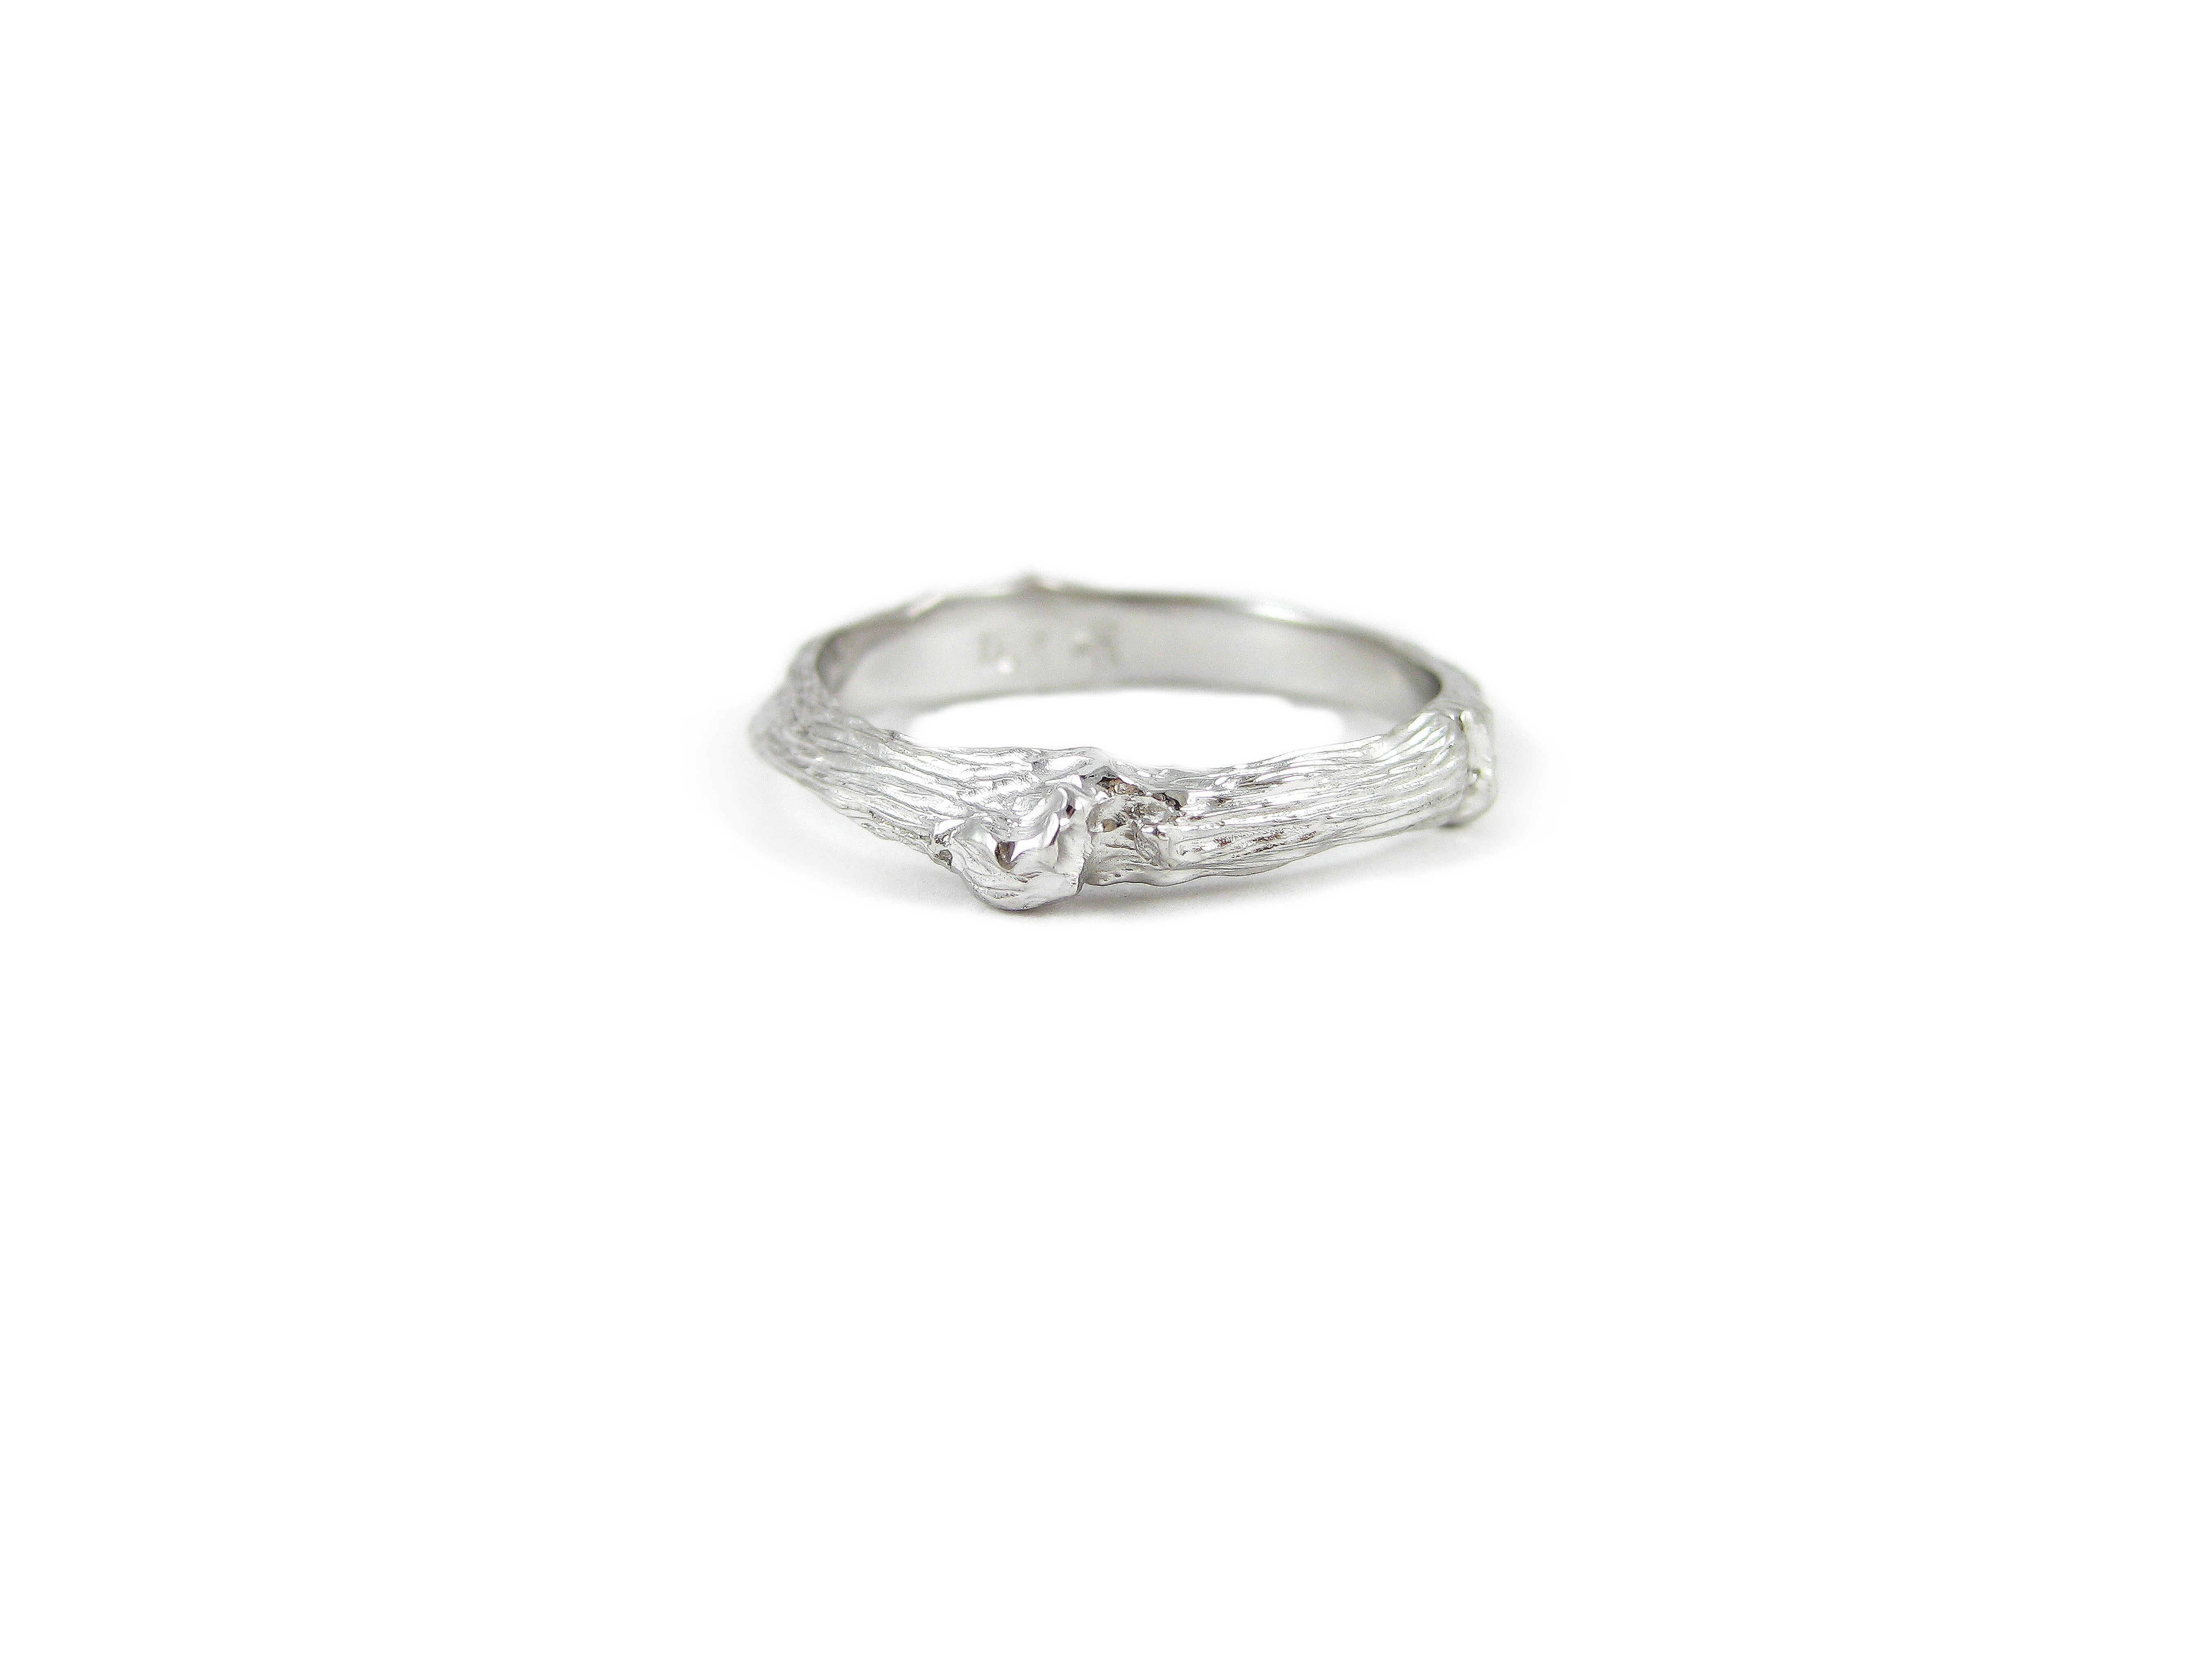 Set in 18k white gold, the organic spirit of K. Brunini is captured through the intricate twig design on a band that channels the eternal Tree of Life. This is the more delicate ring from our Twig Collection, designed to embody the power and grace